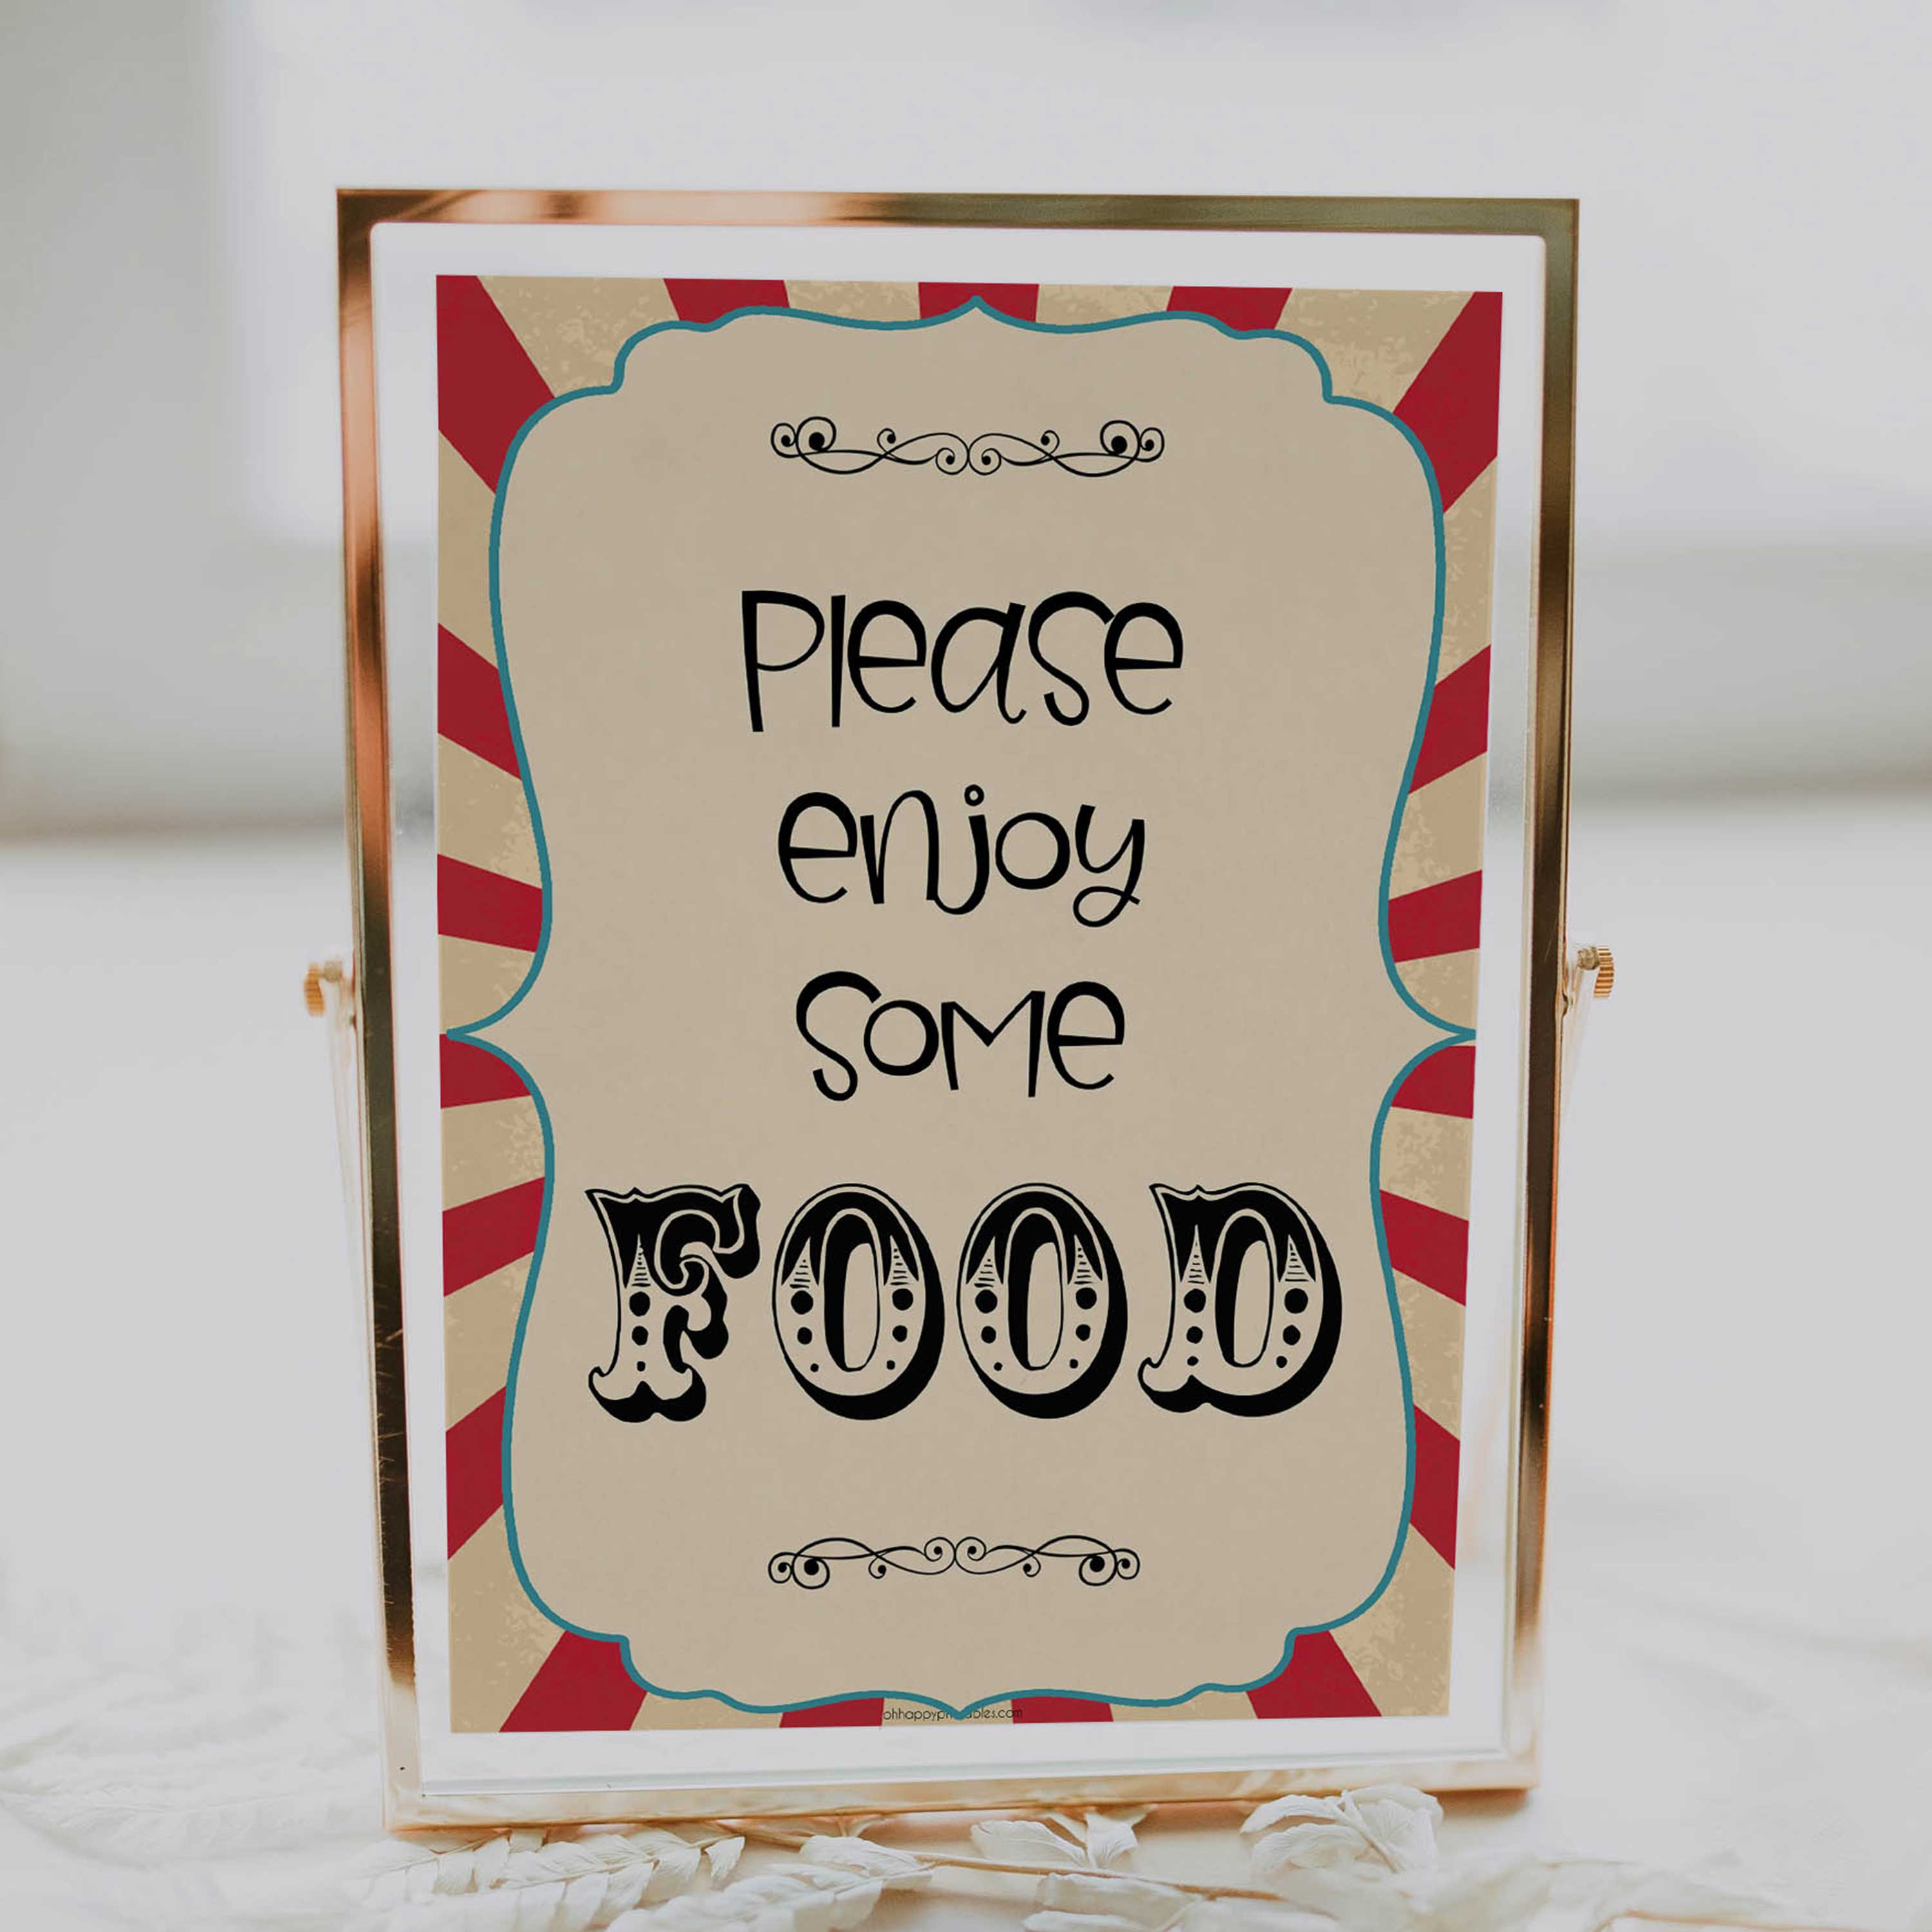 food baby signs, food table signs decor, Circus baby decor, printable baby table signs, printable baby decor, carnival table signs, fun baby signs, circus fun baby table signs